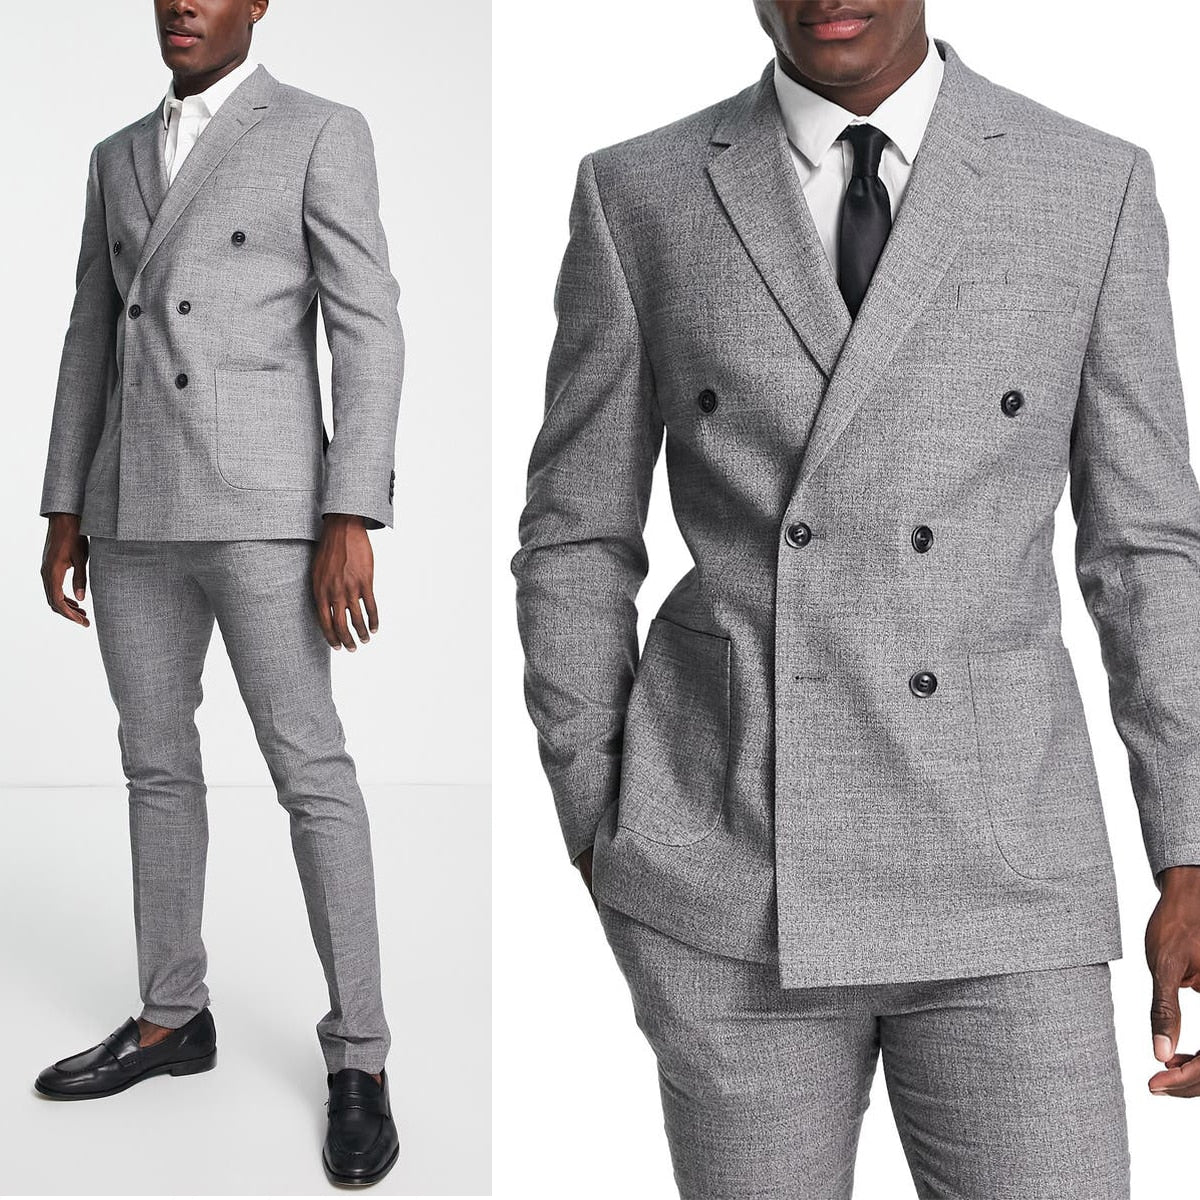 Classic Grey Wedding Men Suit Tailor-Made Business Three-Pieces Jacket Vest Pant Designer Formal Occasion Costume Made